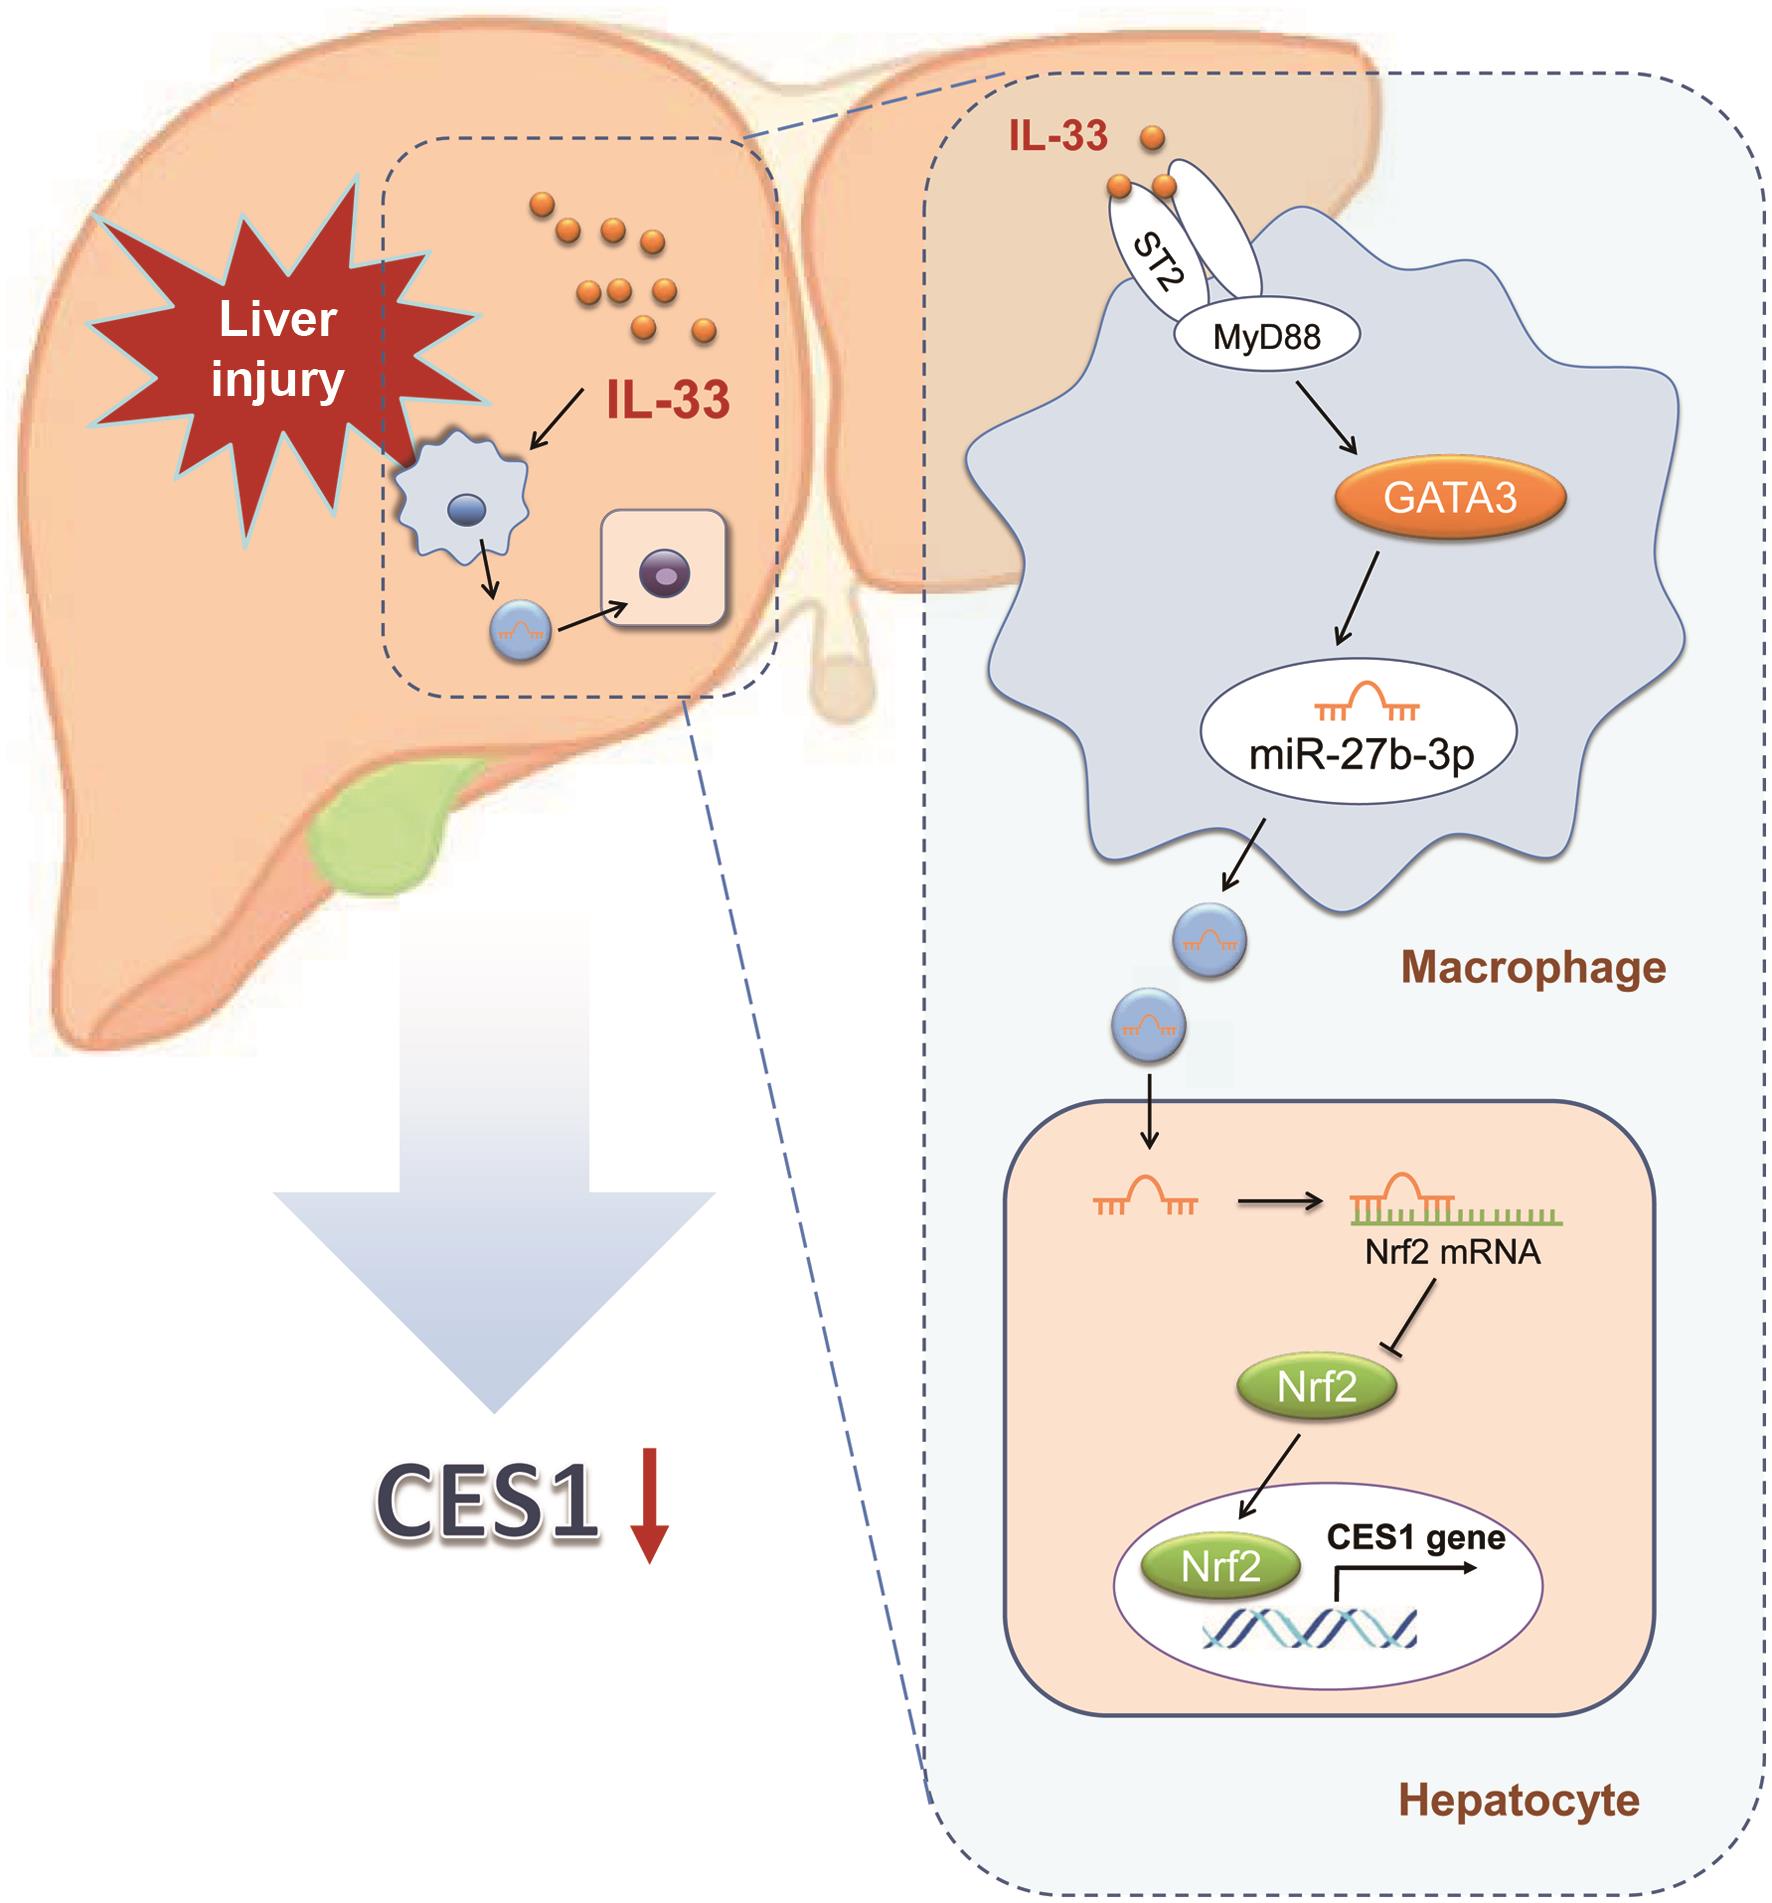 Summary of the mechanism by which IL-33 suppresses CES1 in liver injury.